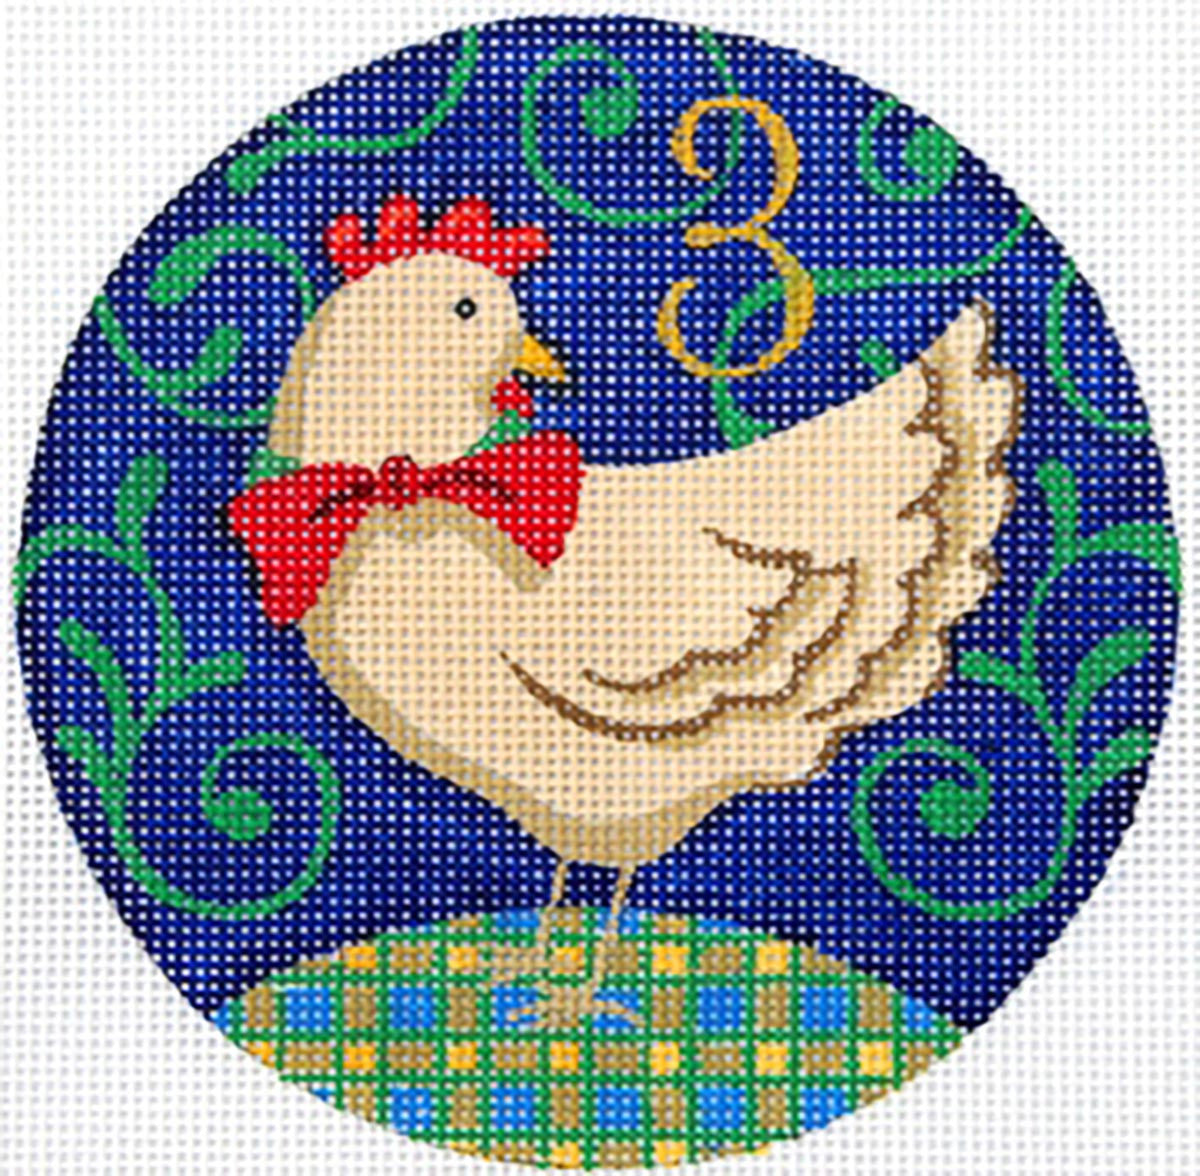 12 Days of Christmas 3 French Hens handpainted Needlepoint canvas by Juliemar Designs